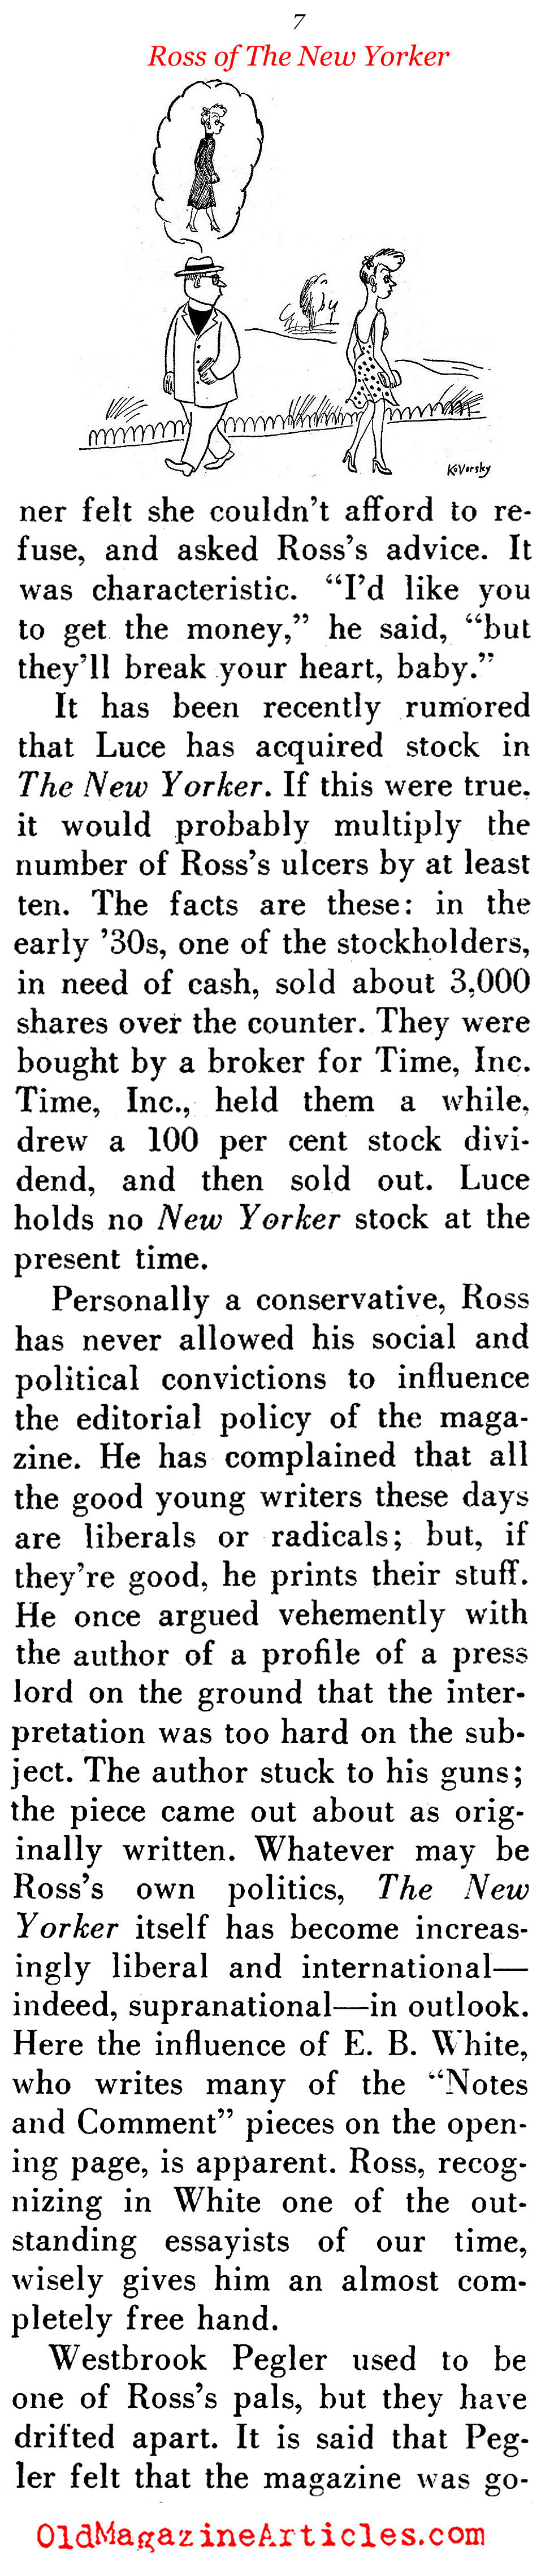 Ross of The New Yorker: Part II ('48 Magazine, 1948)